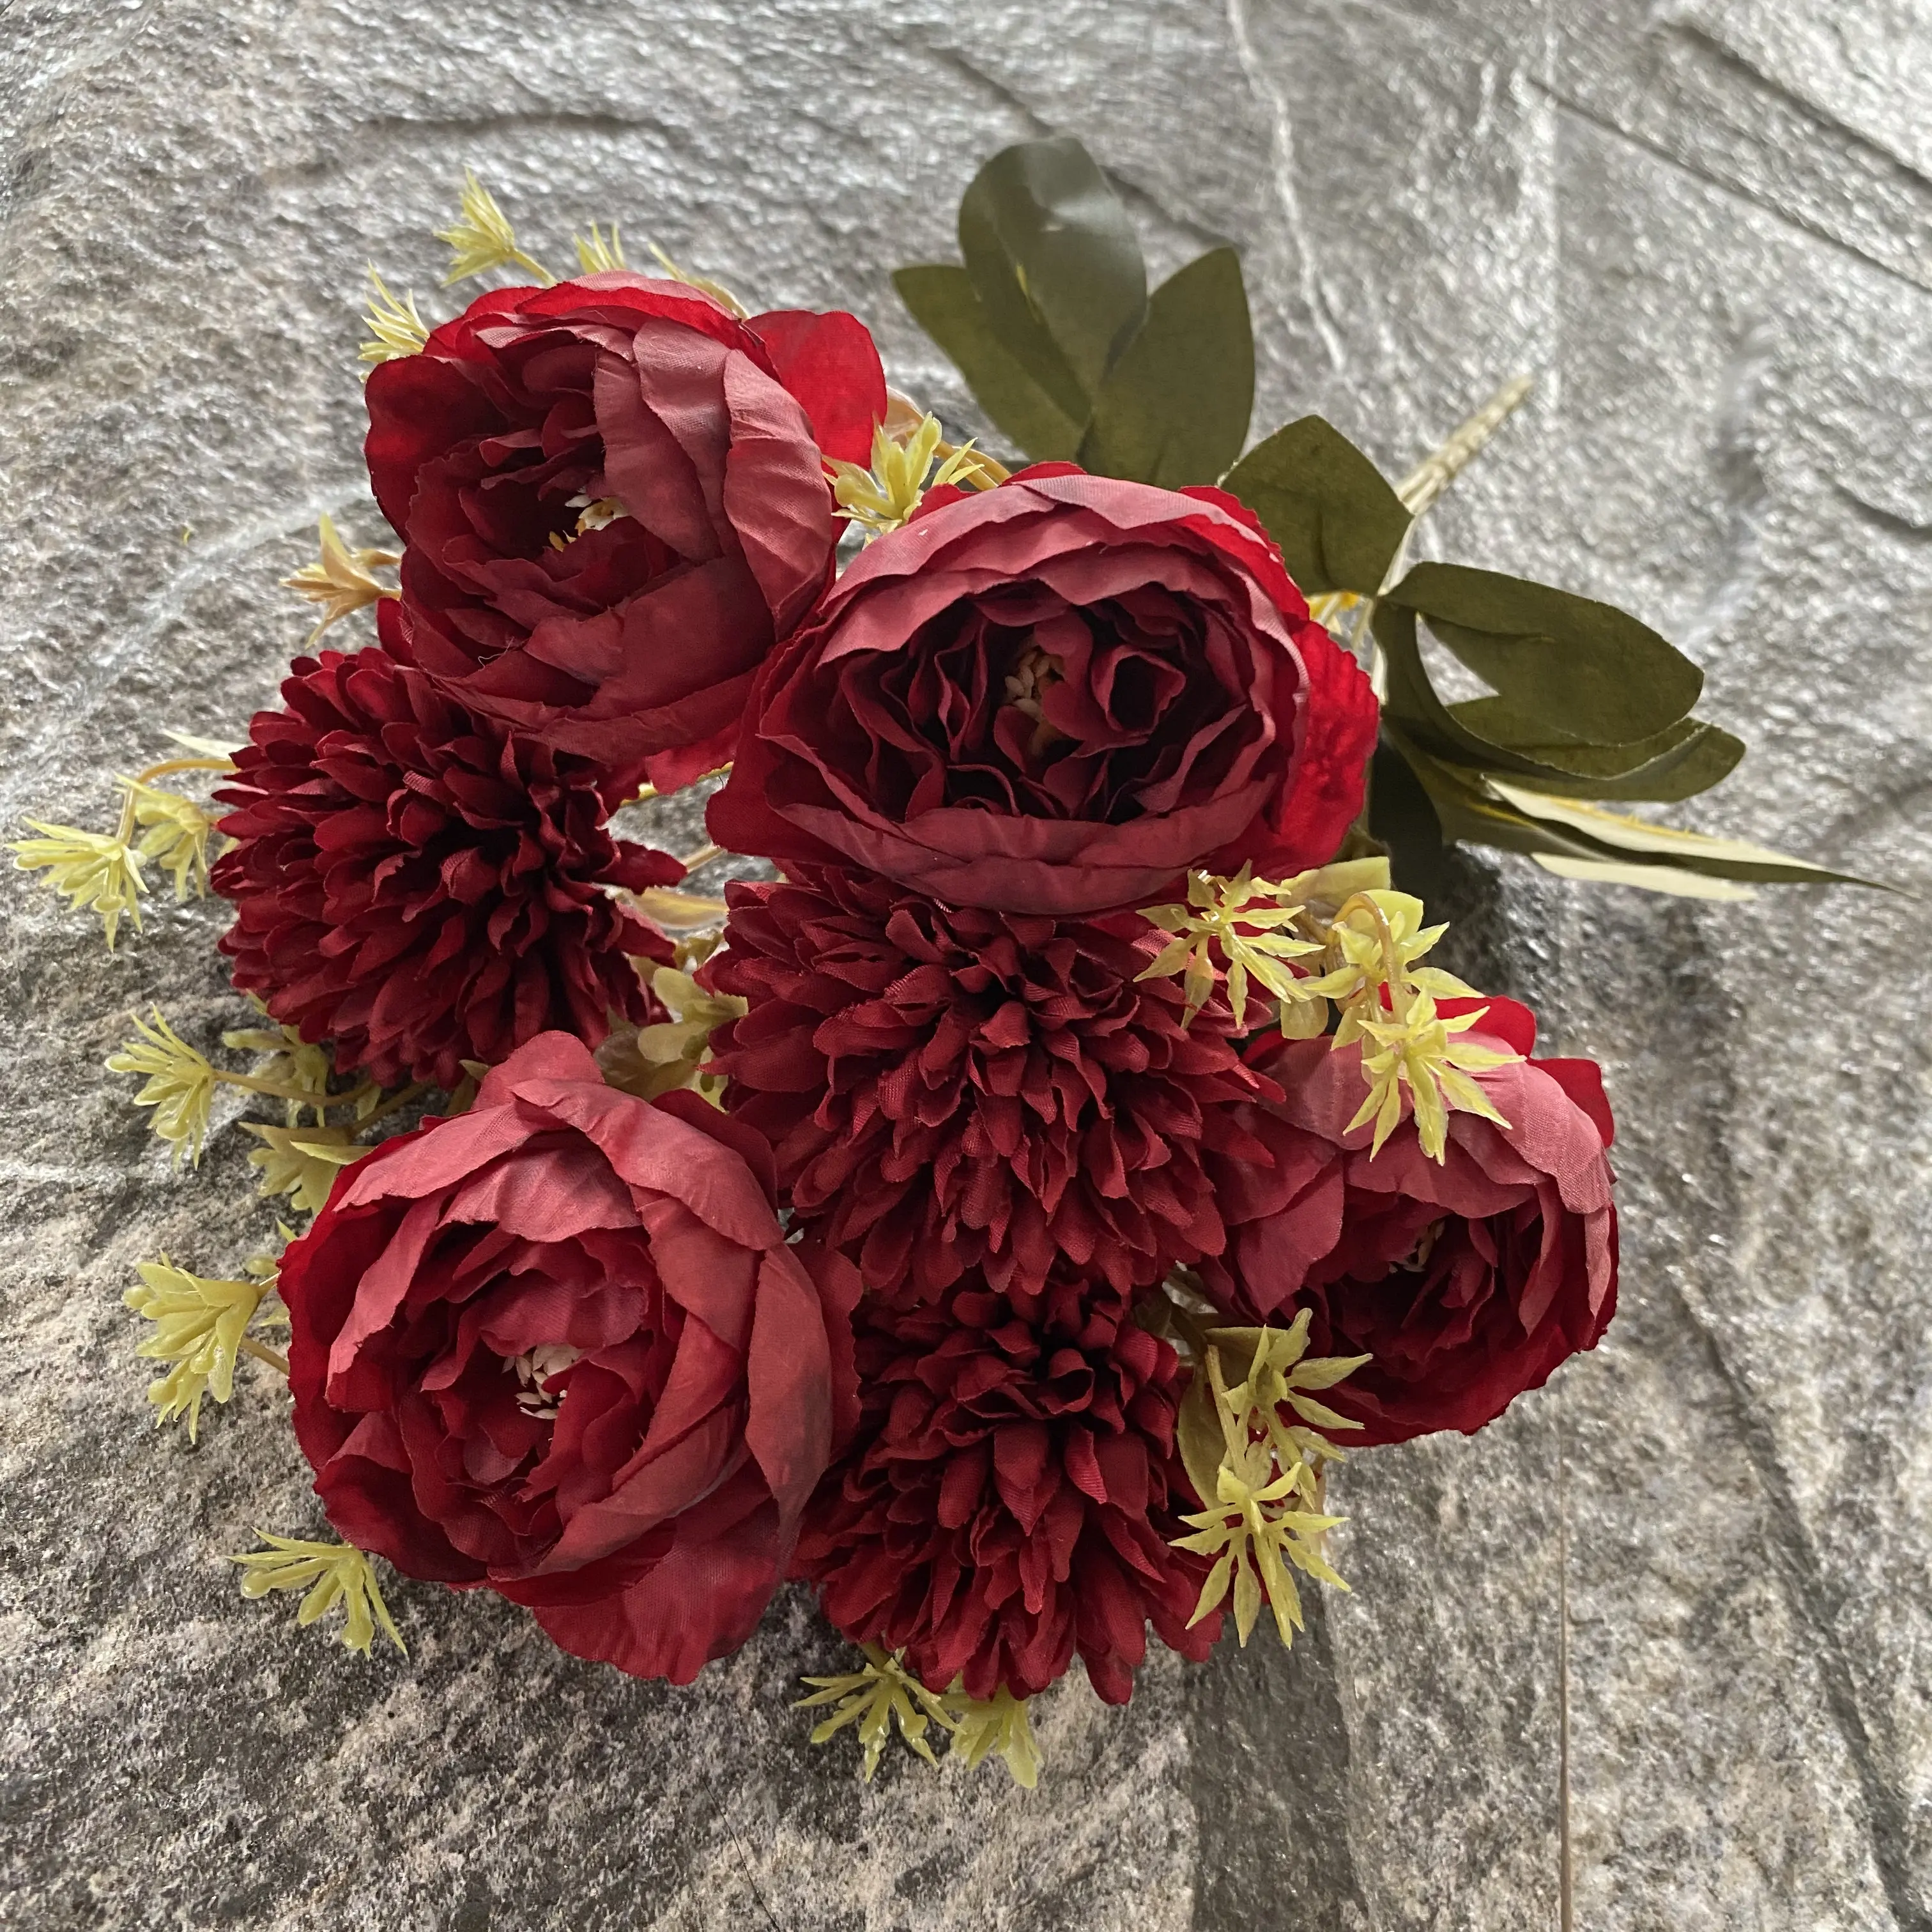 Wholesale Faux Flower Bunch 35cm Artificial Peony With Chrysanthemum spinosum Silk Flowers for Wedding Party Decor